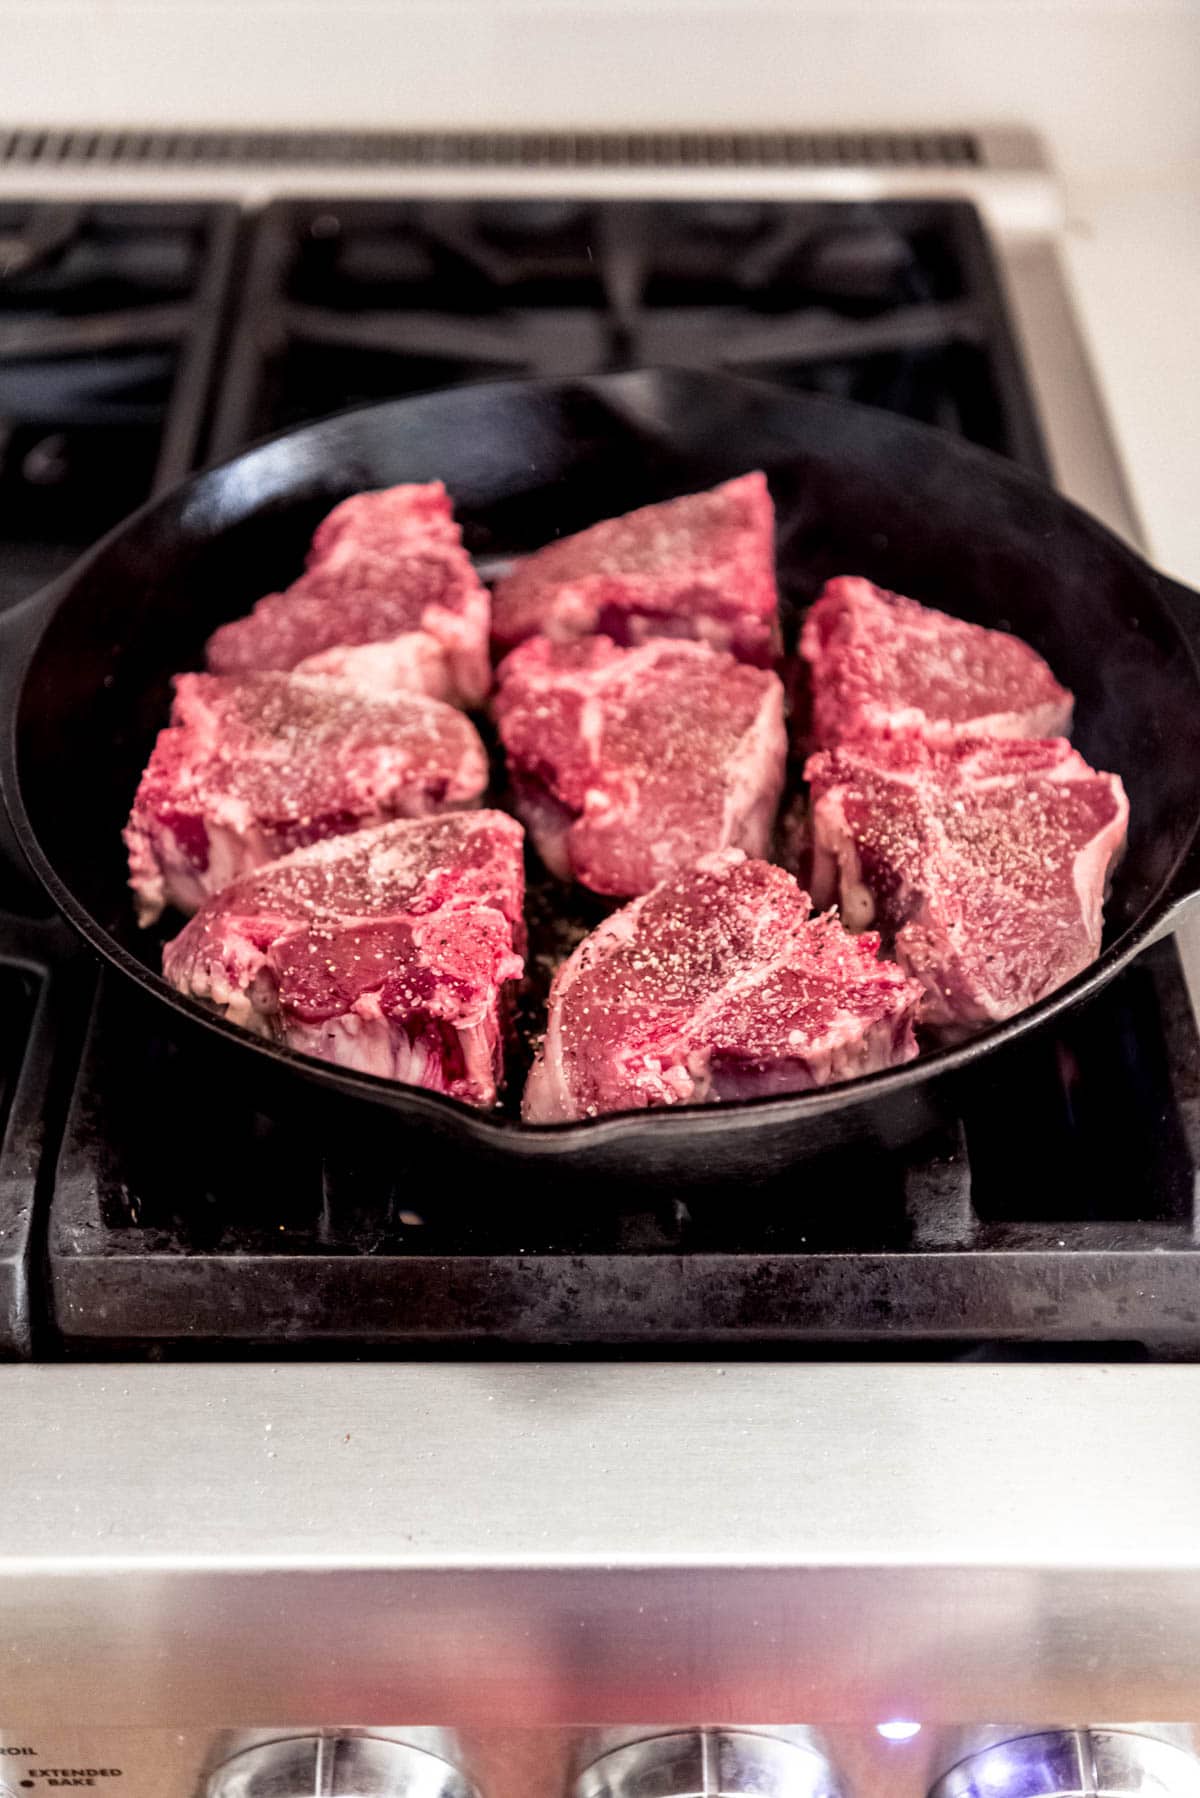 A skillet on the stove filled with seasoned lamb chops.